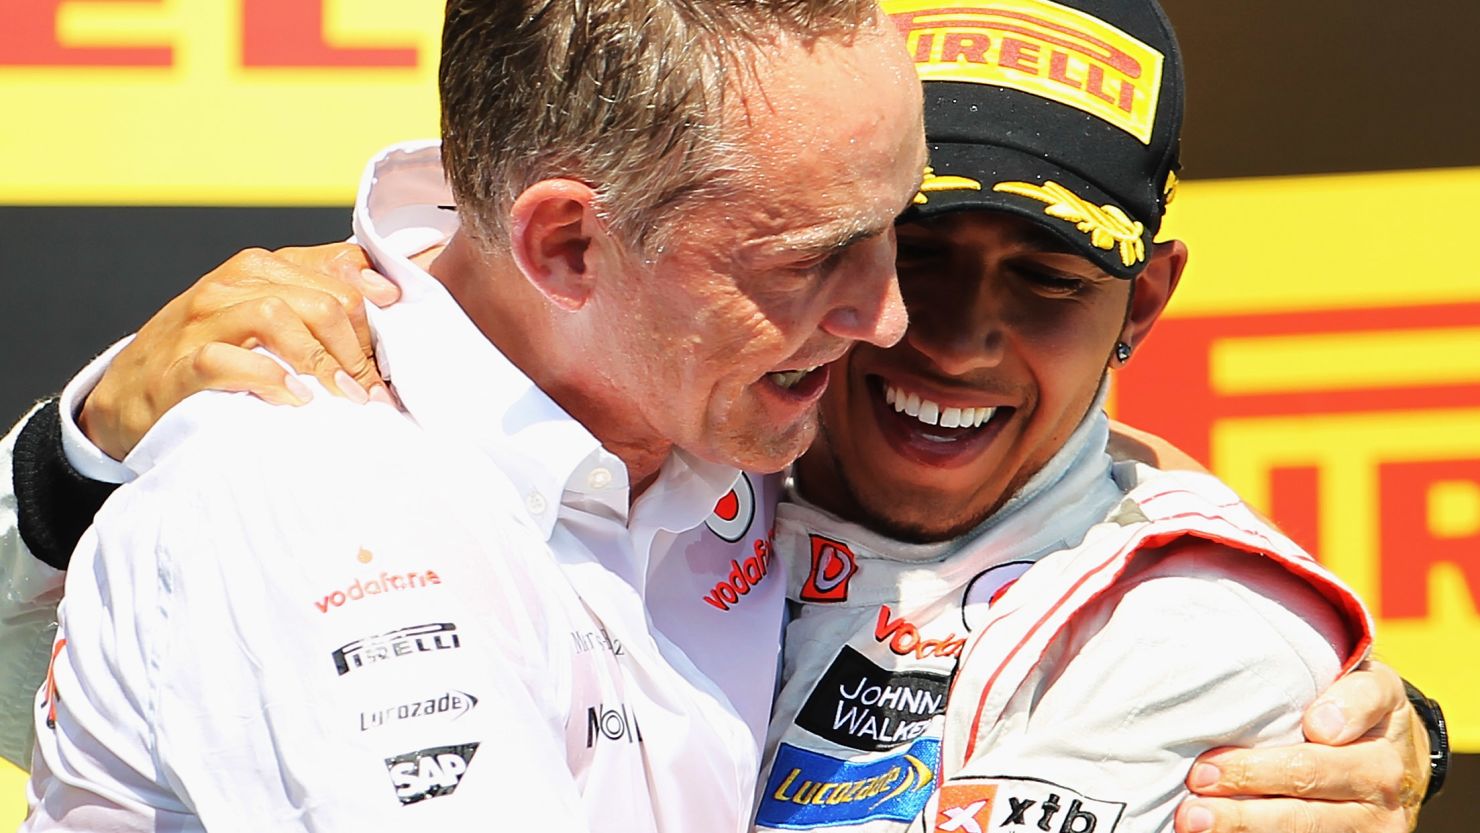 Happier times: Martin Whitmarsh (left) celebrates with Lewis Hamilton after he won this season's Canadian Grand Prix.